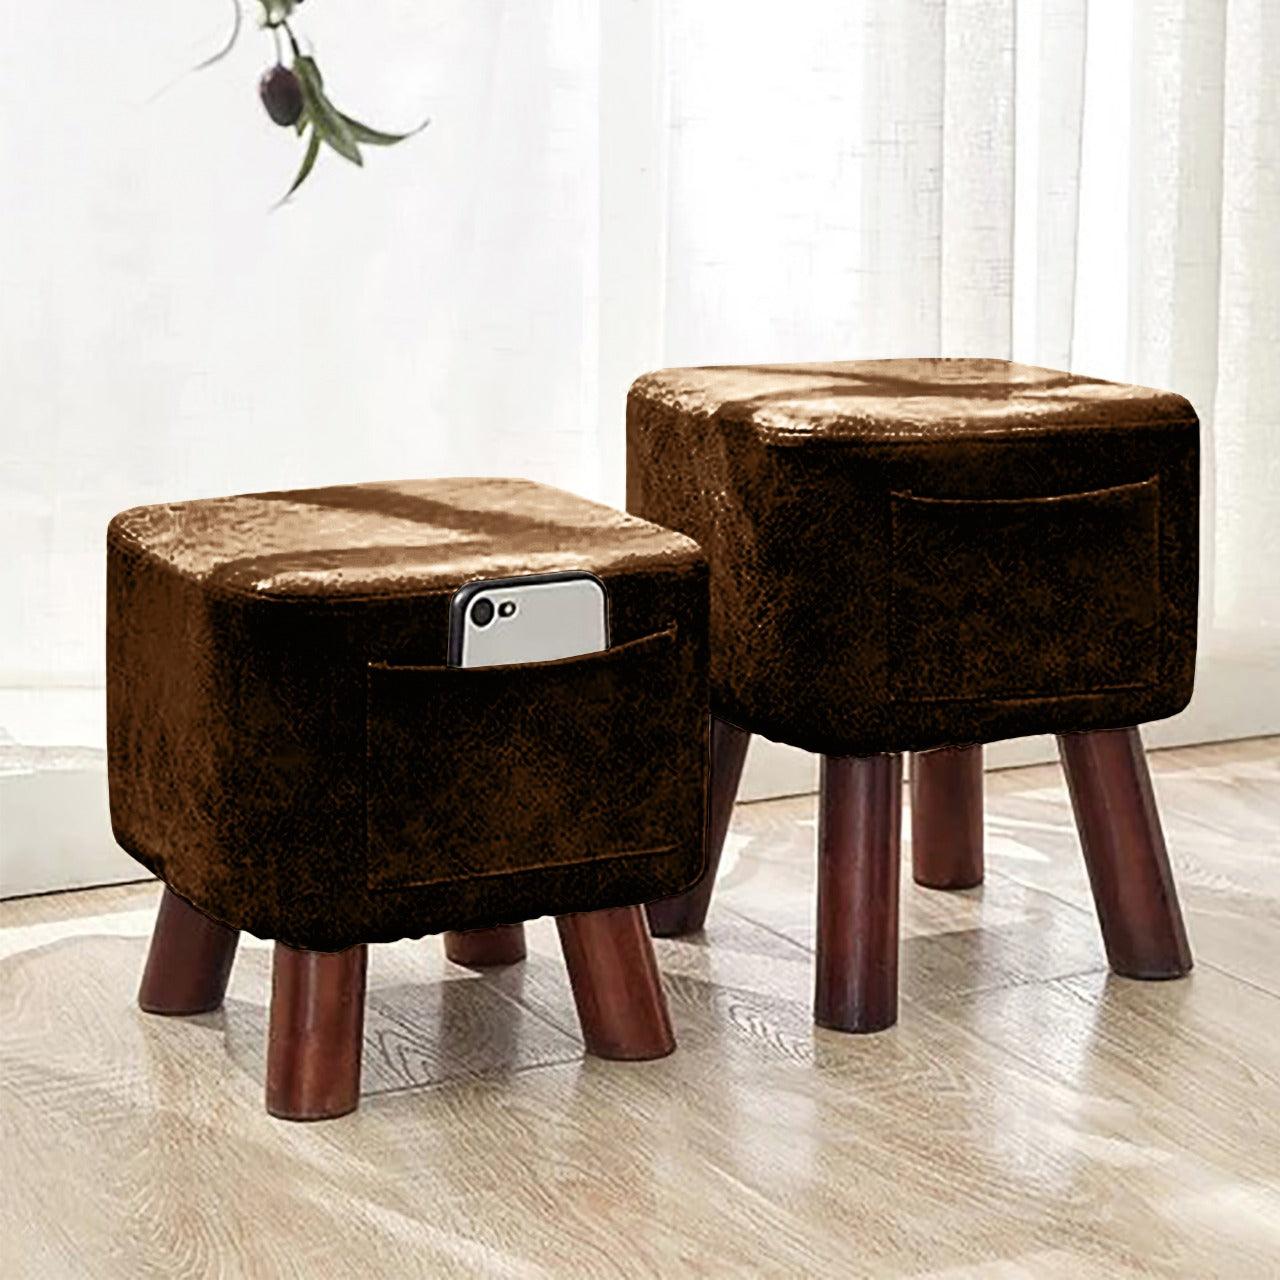 Wooden stool Square shape With Pocket - 146 - 92Bedding